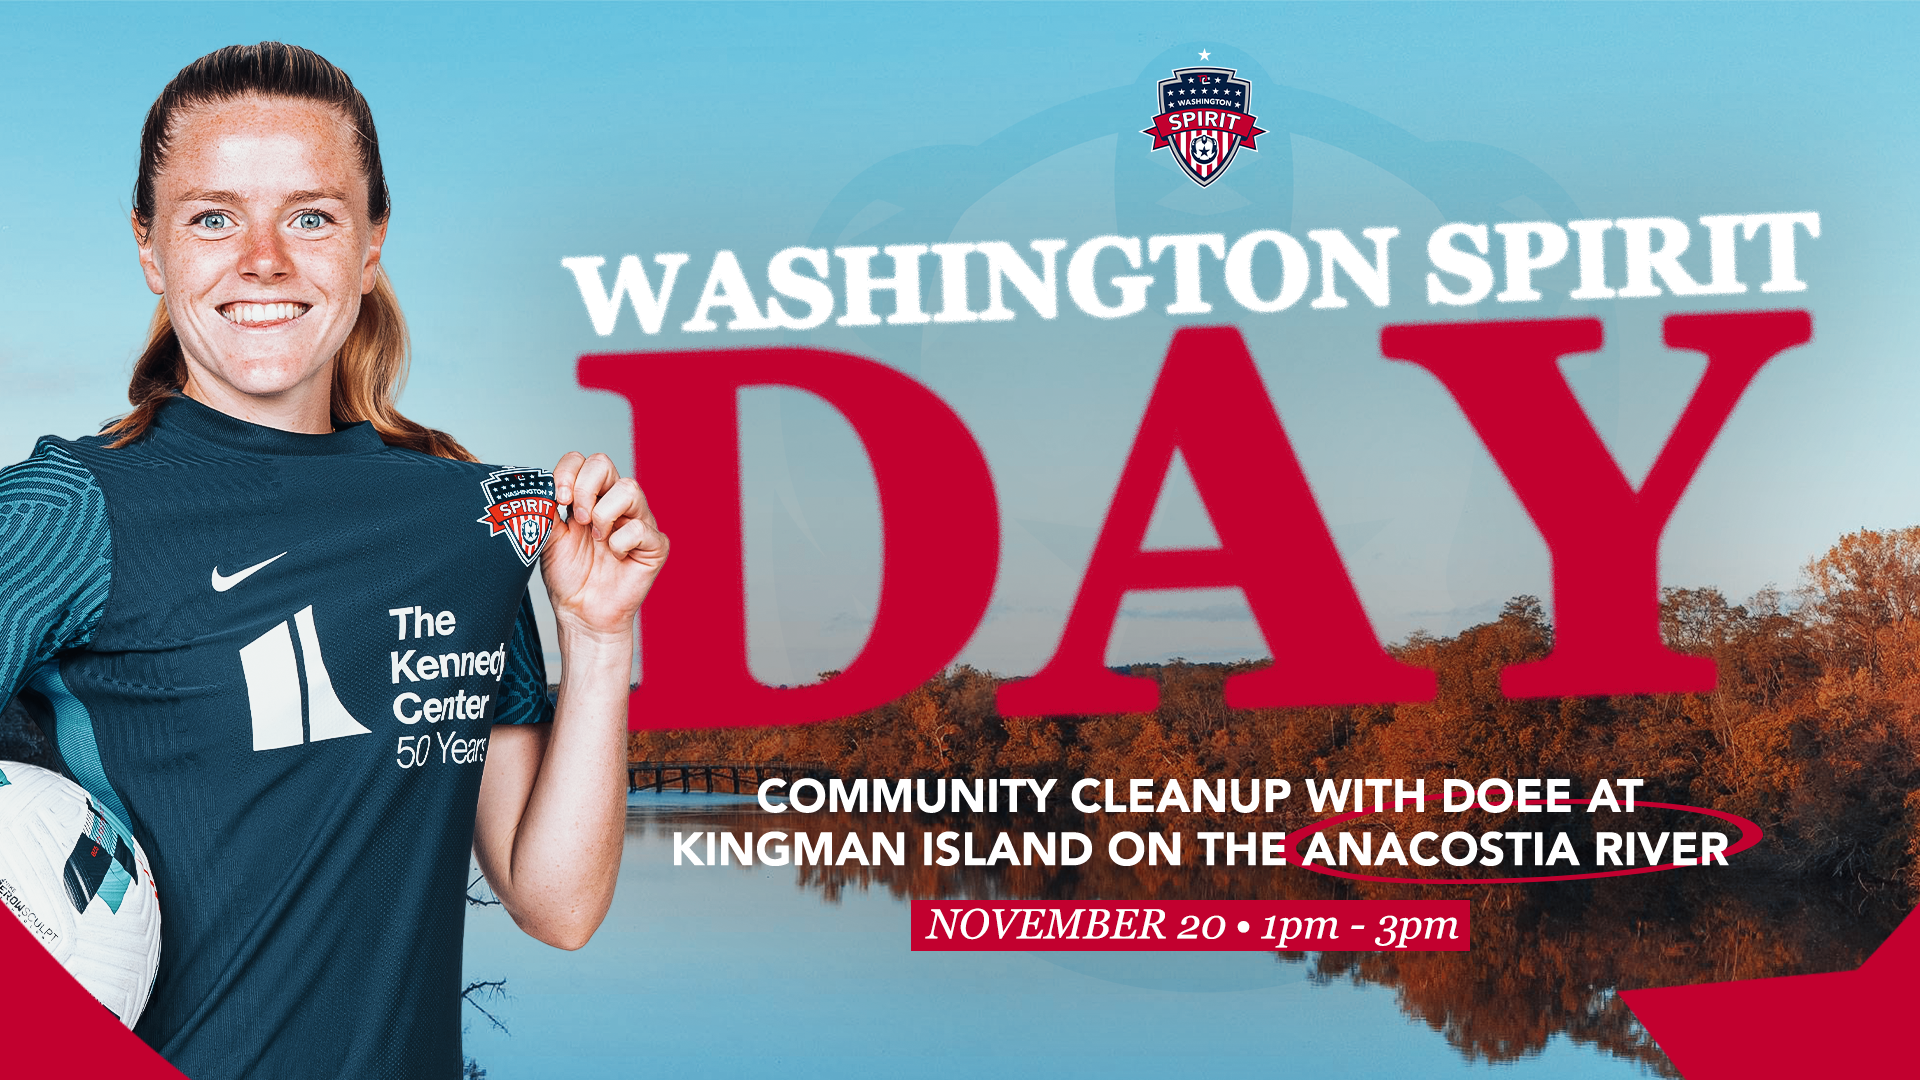 Spirit To Celebrate First Washington Spirit Day With Community Cleanup Featured Image